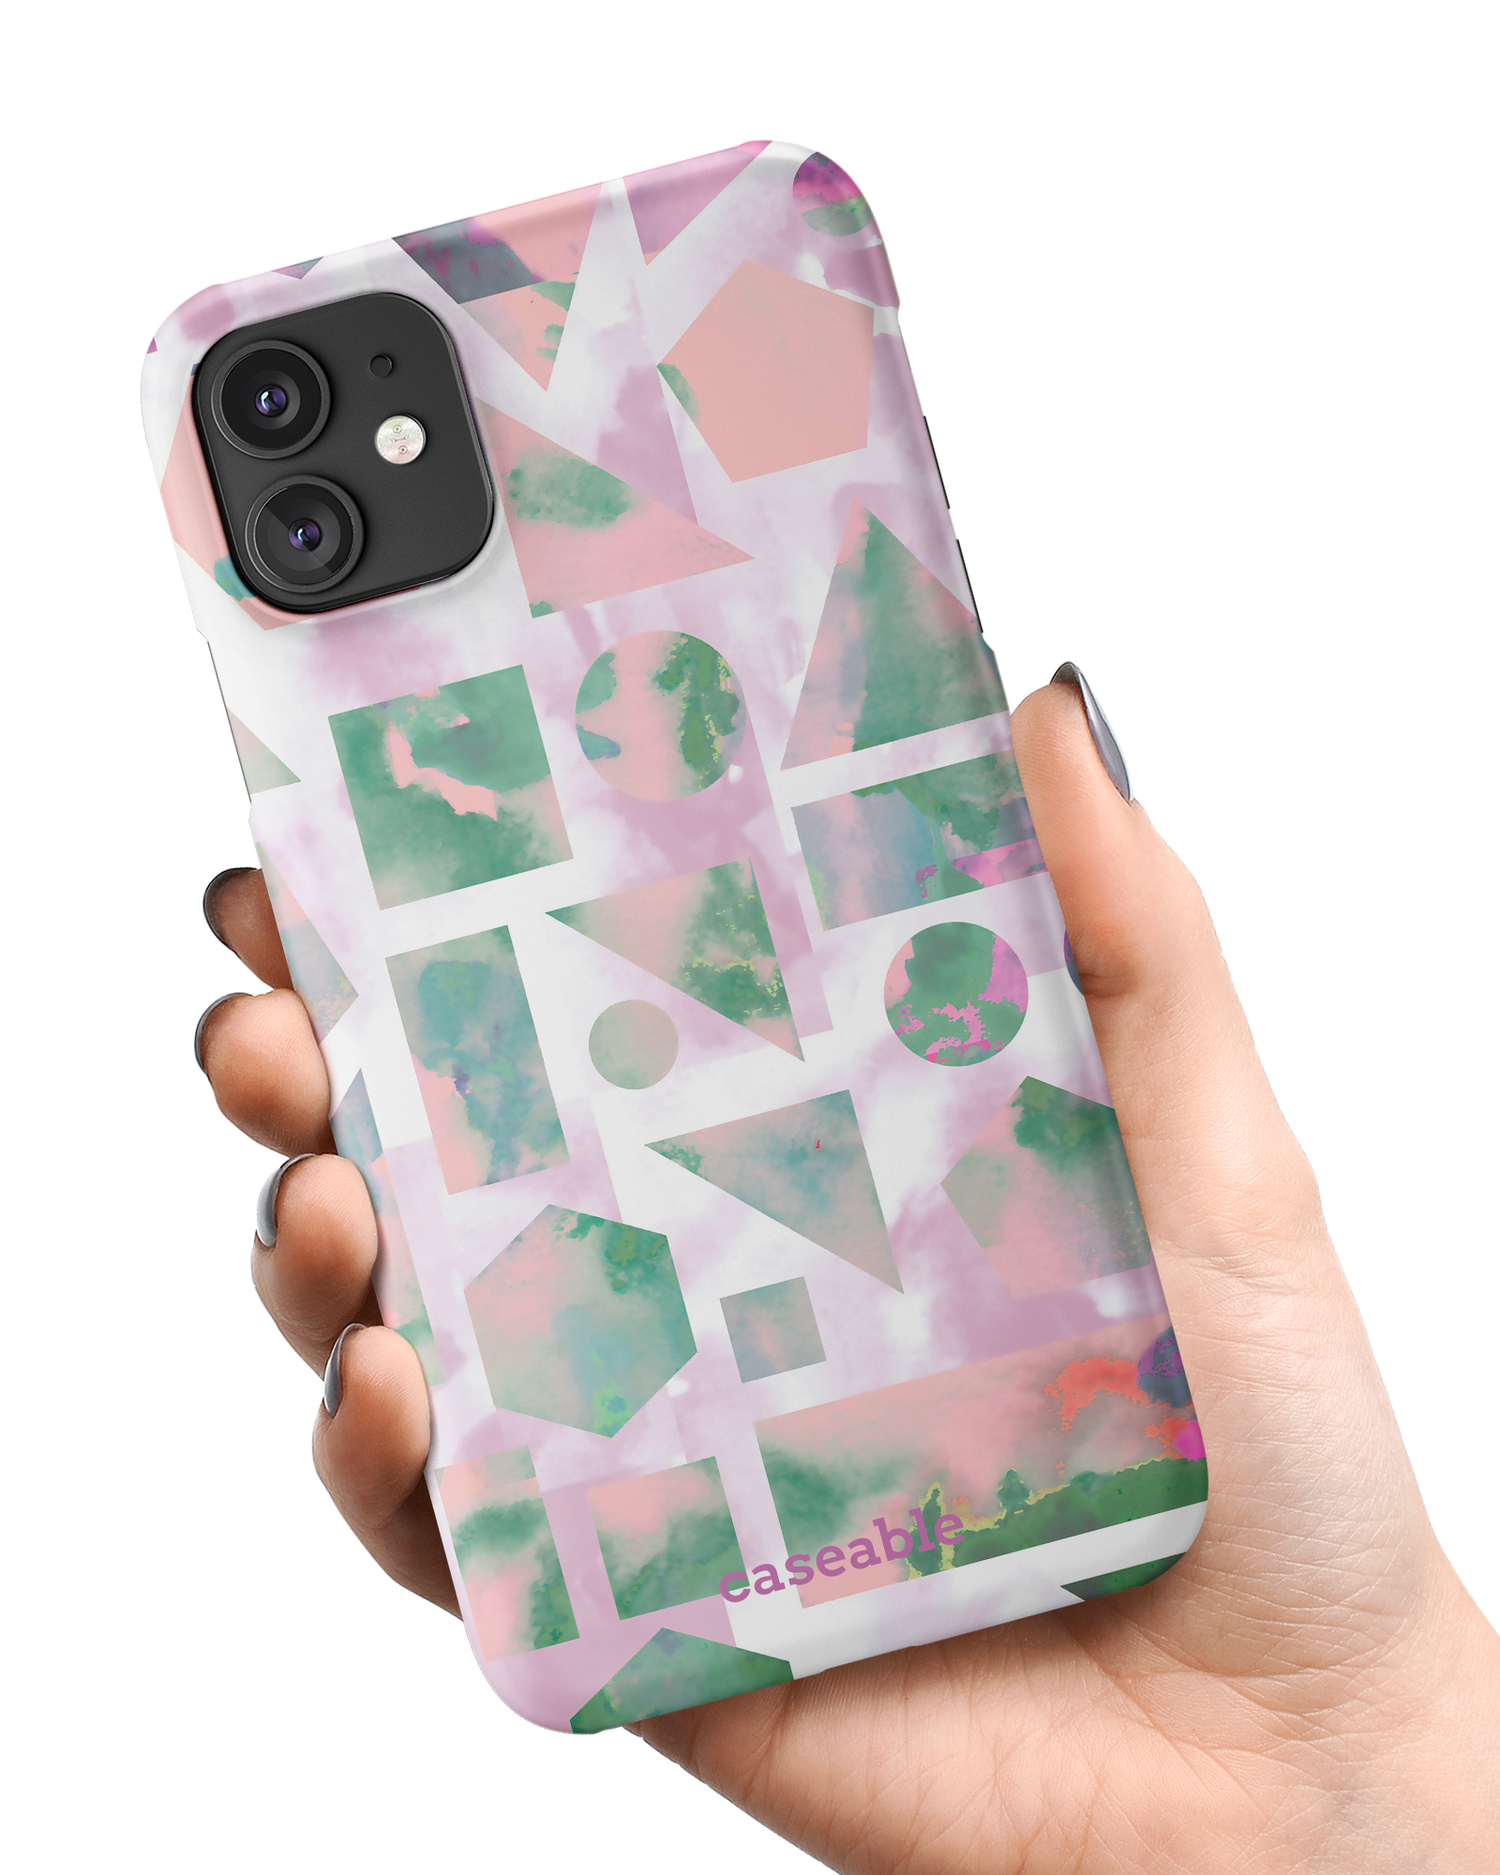 Dreamscapes Hard Shell Phone Case Apple iPhone 11 held in hand